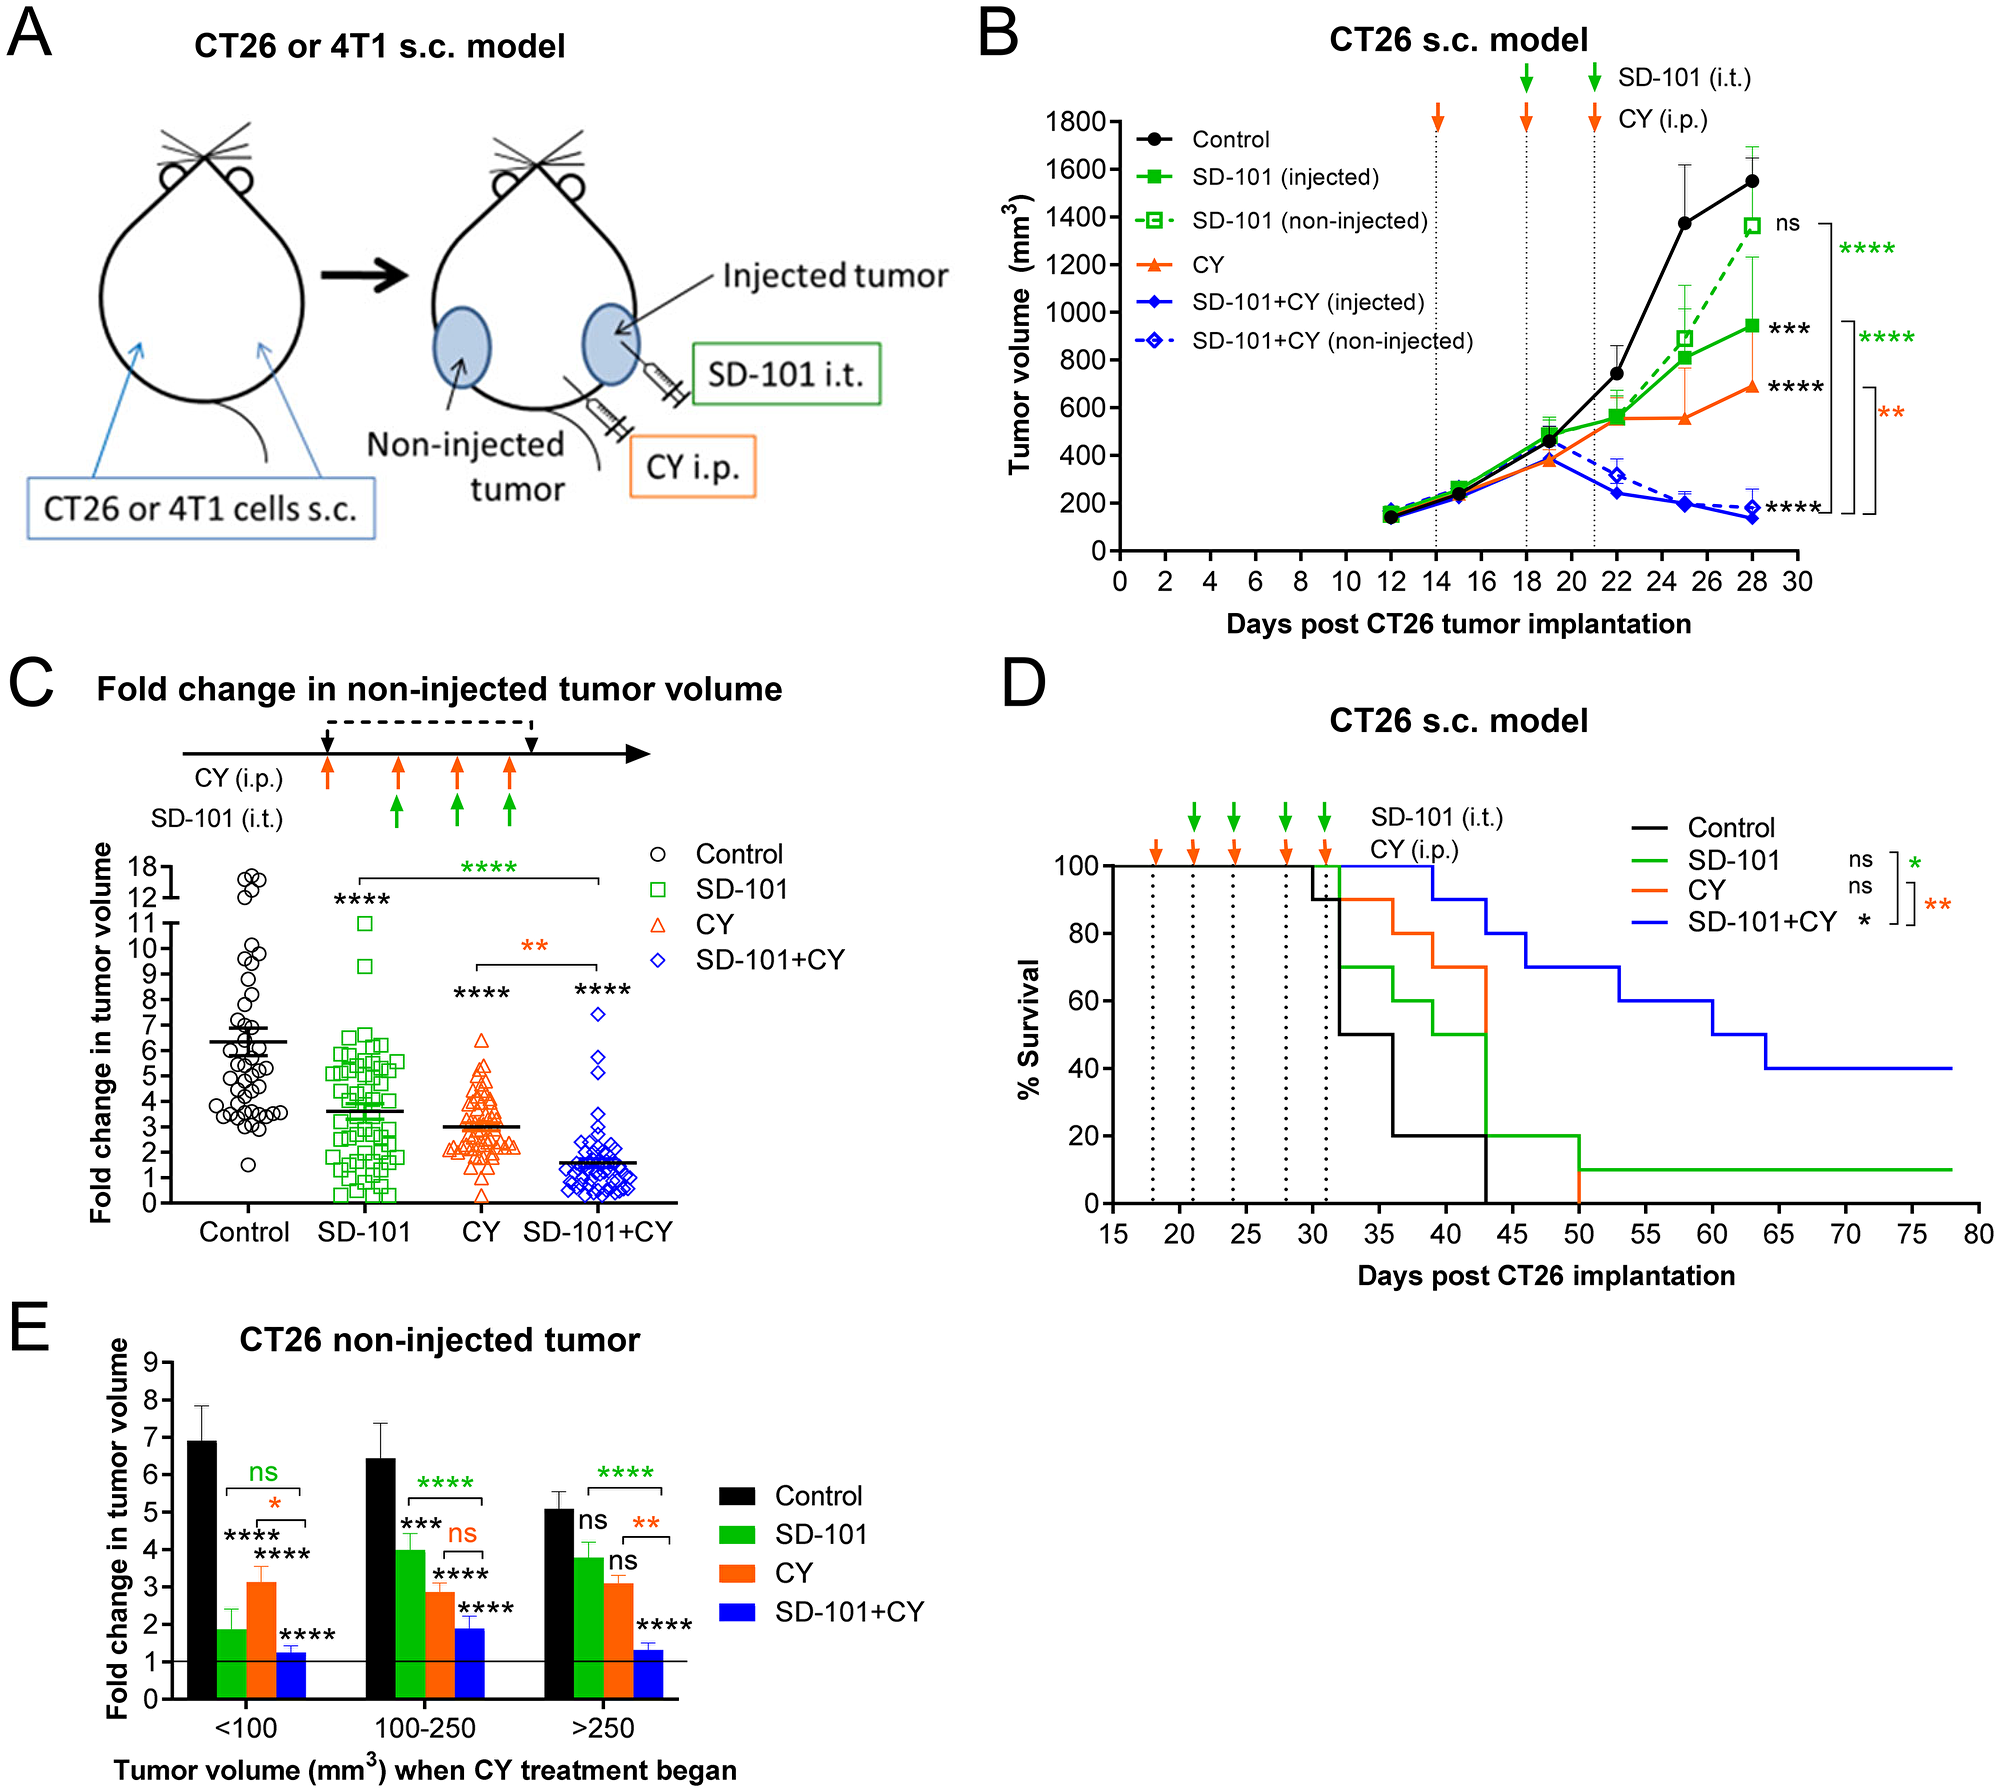 Intratumoral SD-101 combined with low-dose CY effectively inhibits growth of both injected and non-injected tumor sites and promotes survival.